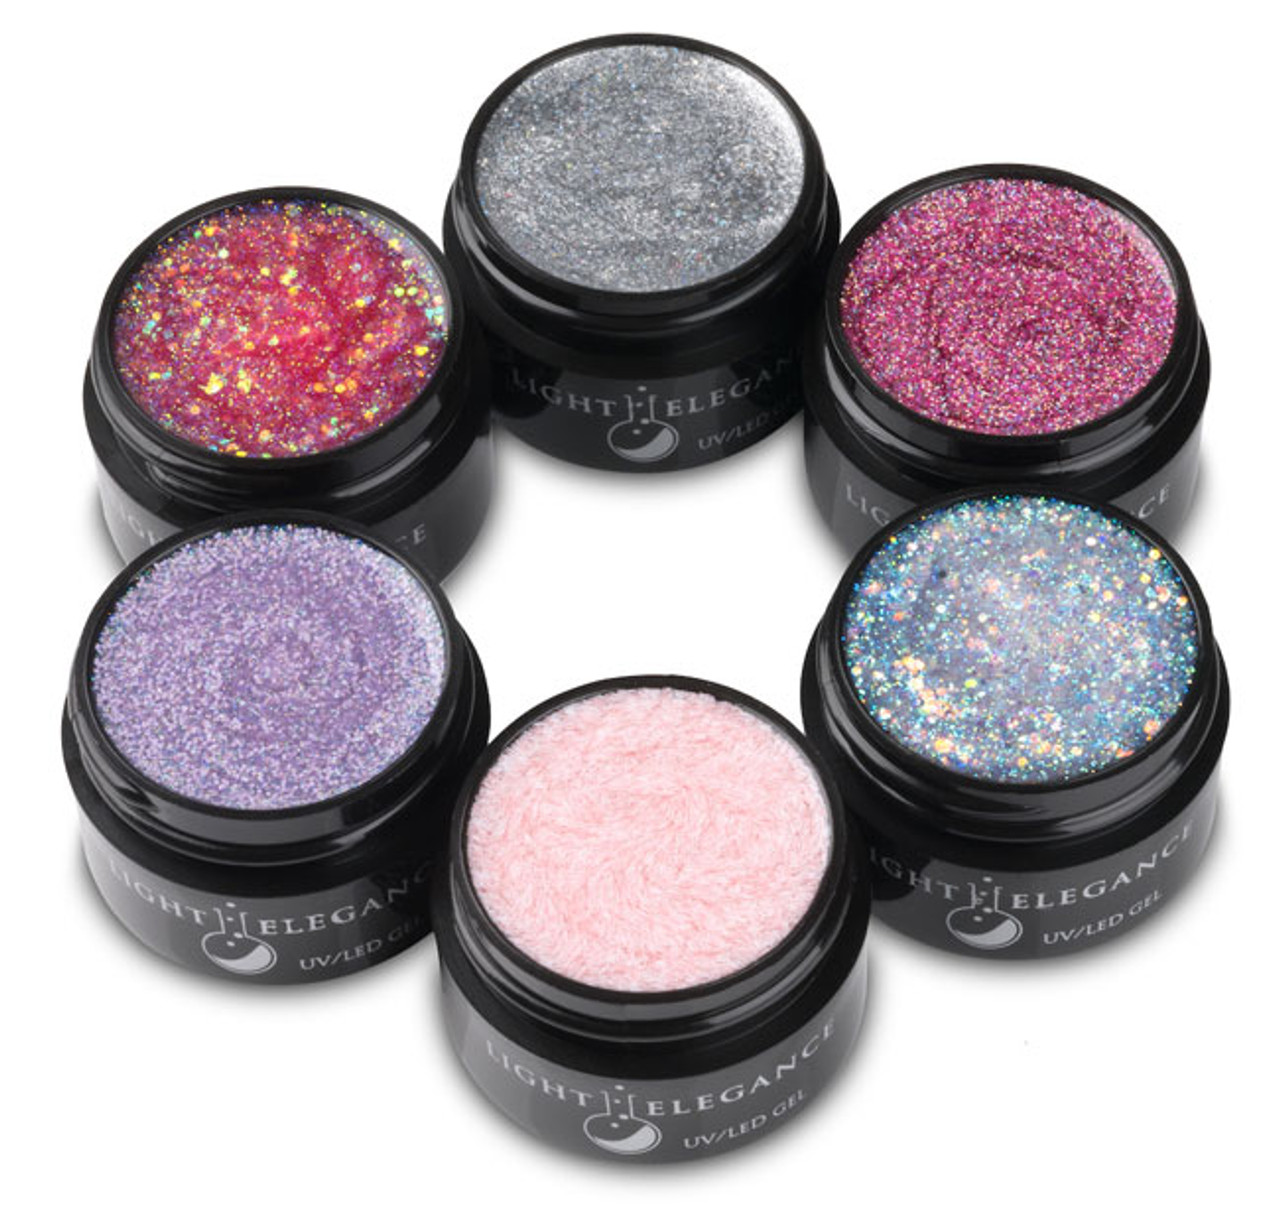 Light Elegance UV/LED Glitter Gel Spring 2019 One Scoop or Two? Collection - 6pc